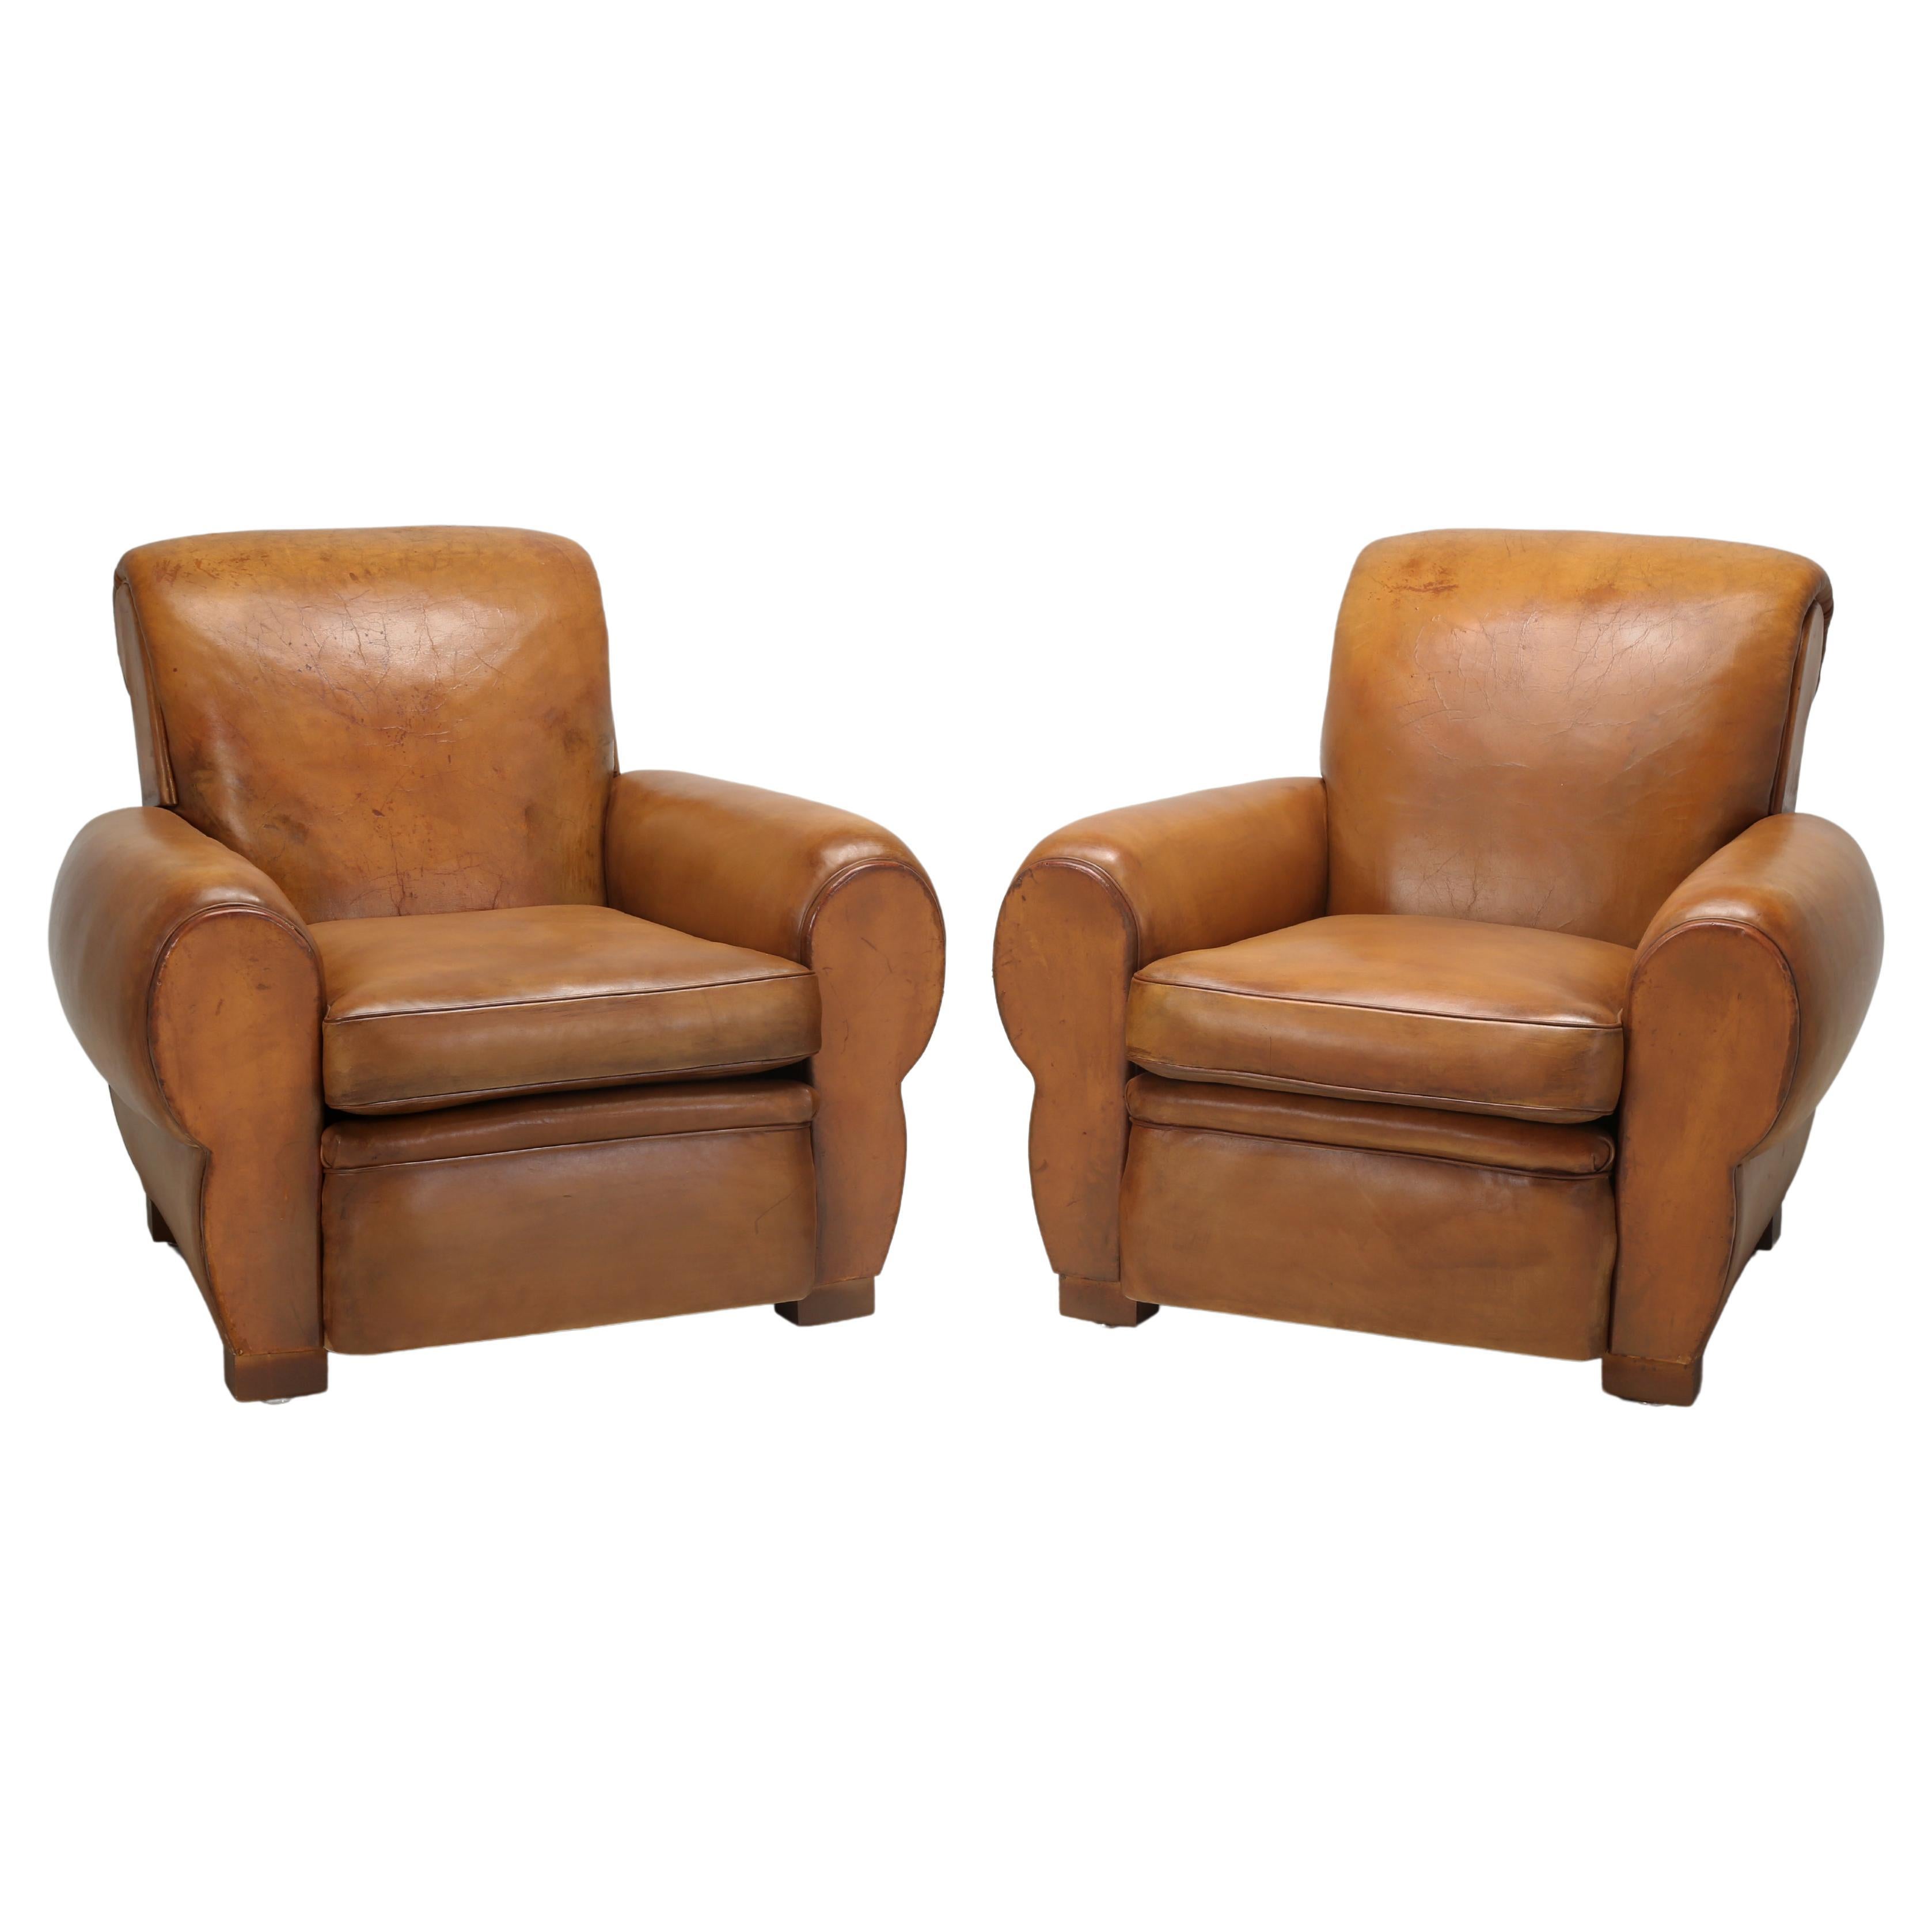 French Leather Club Chairs Properly Restored from Inside Out, Original Leather For Sale